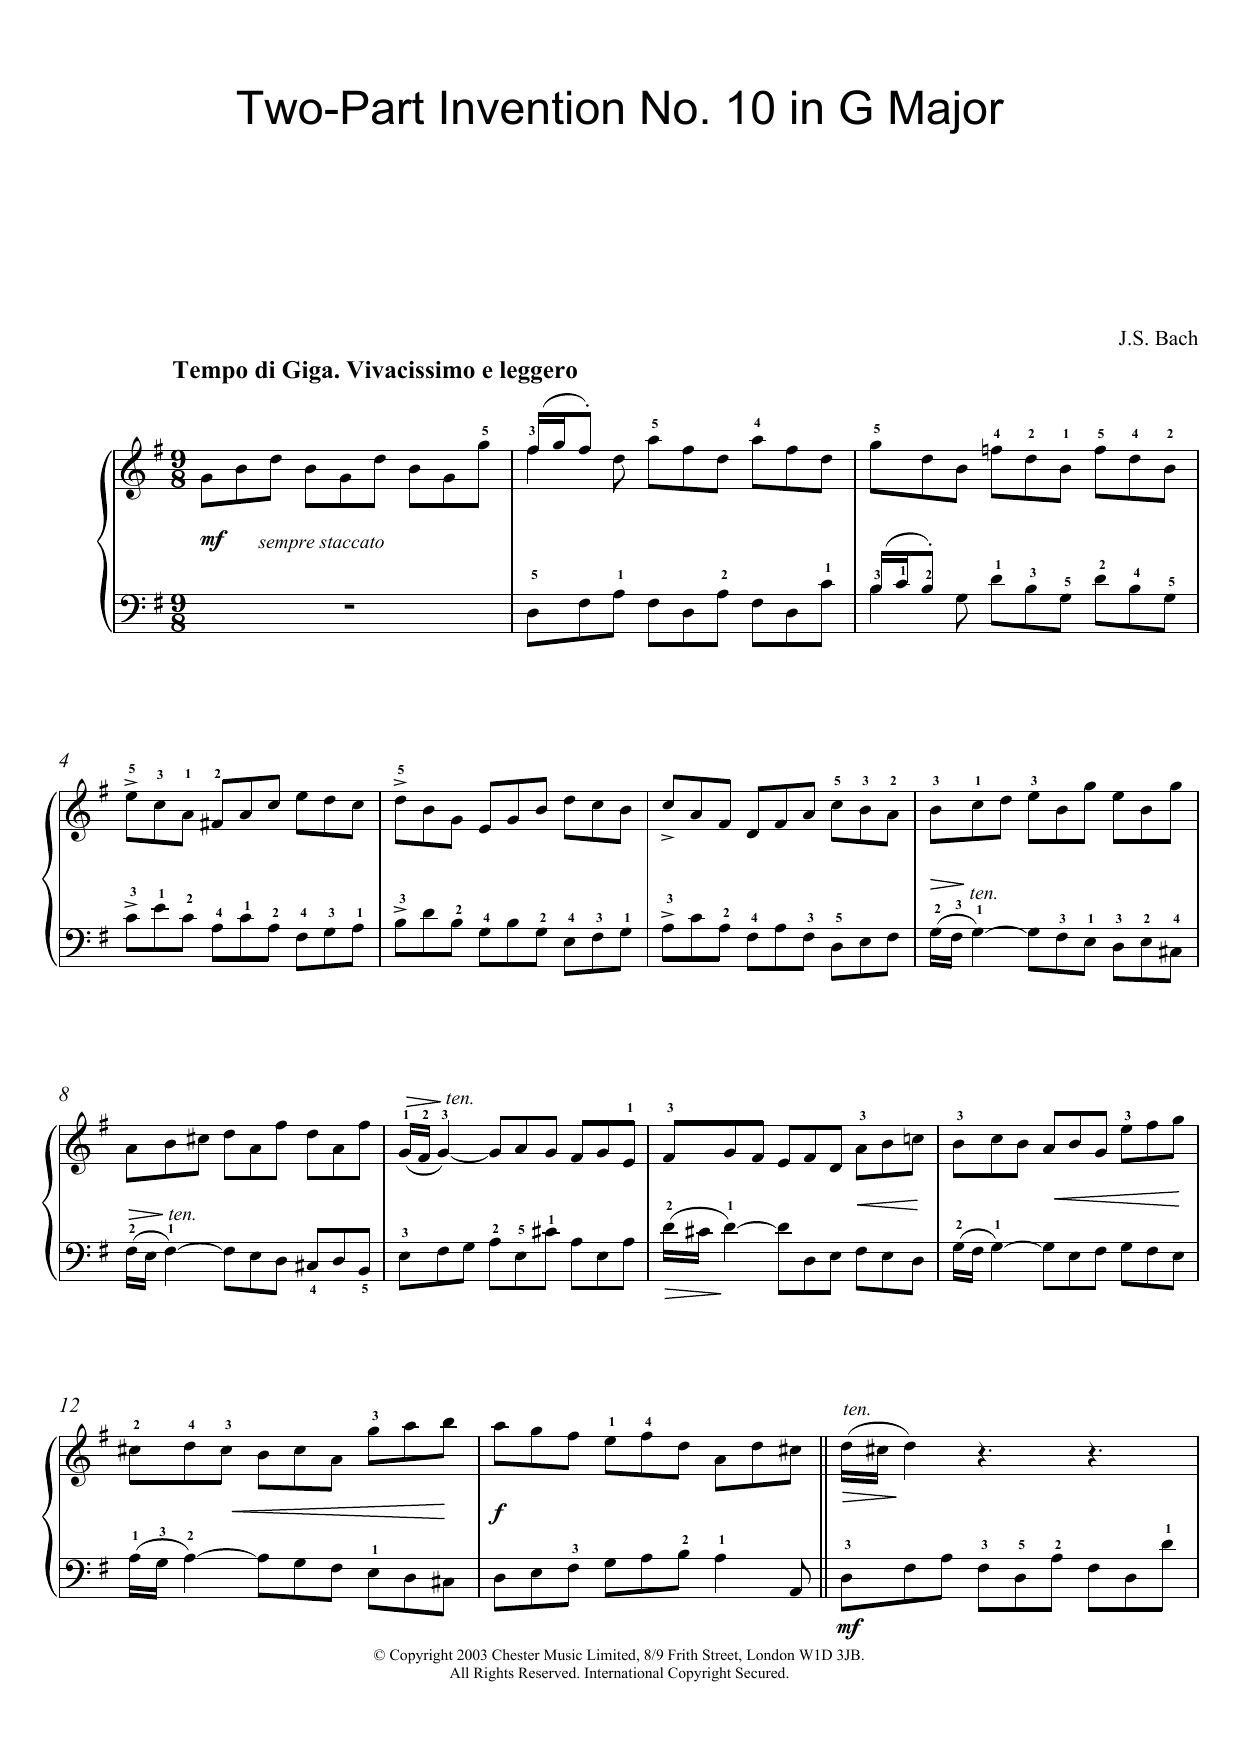 J.S. Bach Two-Part Invention No. 10 in G Major sheet music preview music notes and score for Piano including 2 page(s)